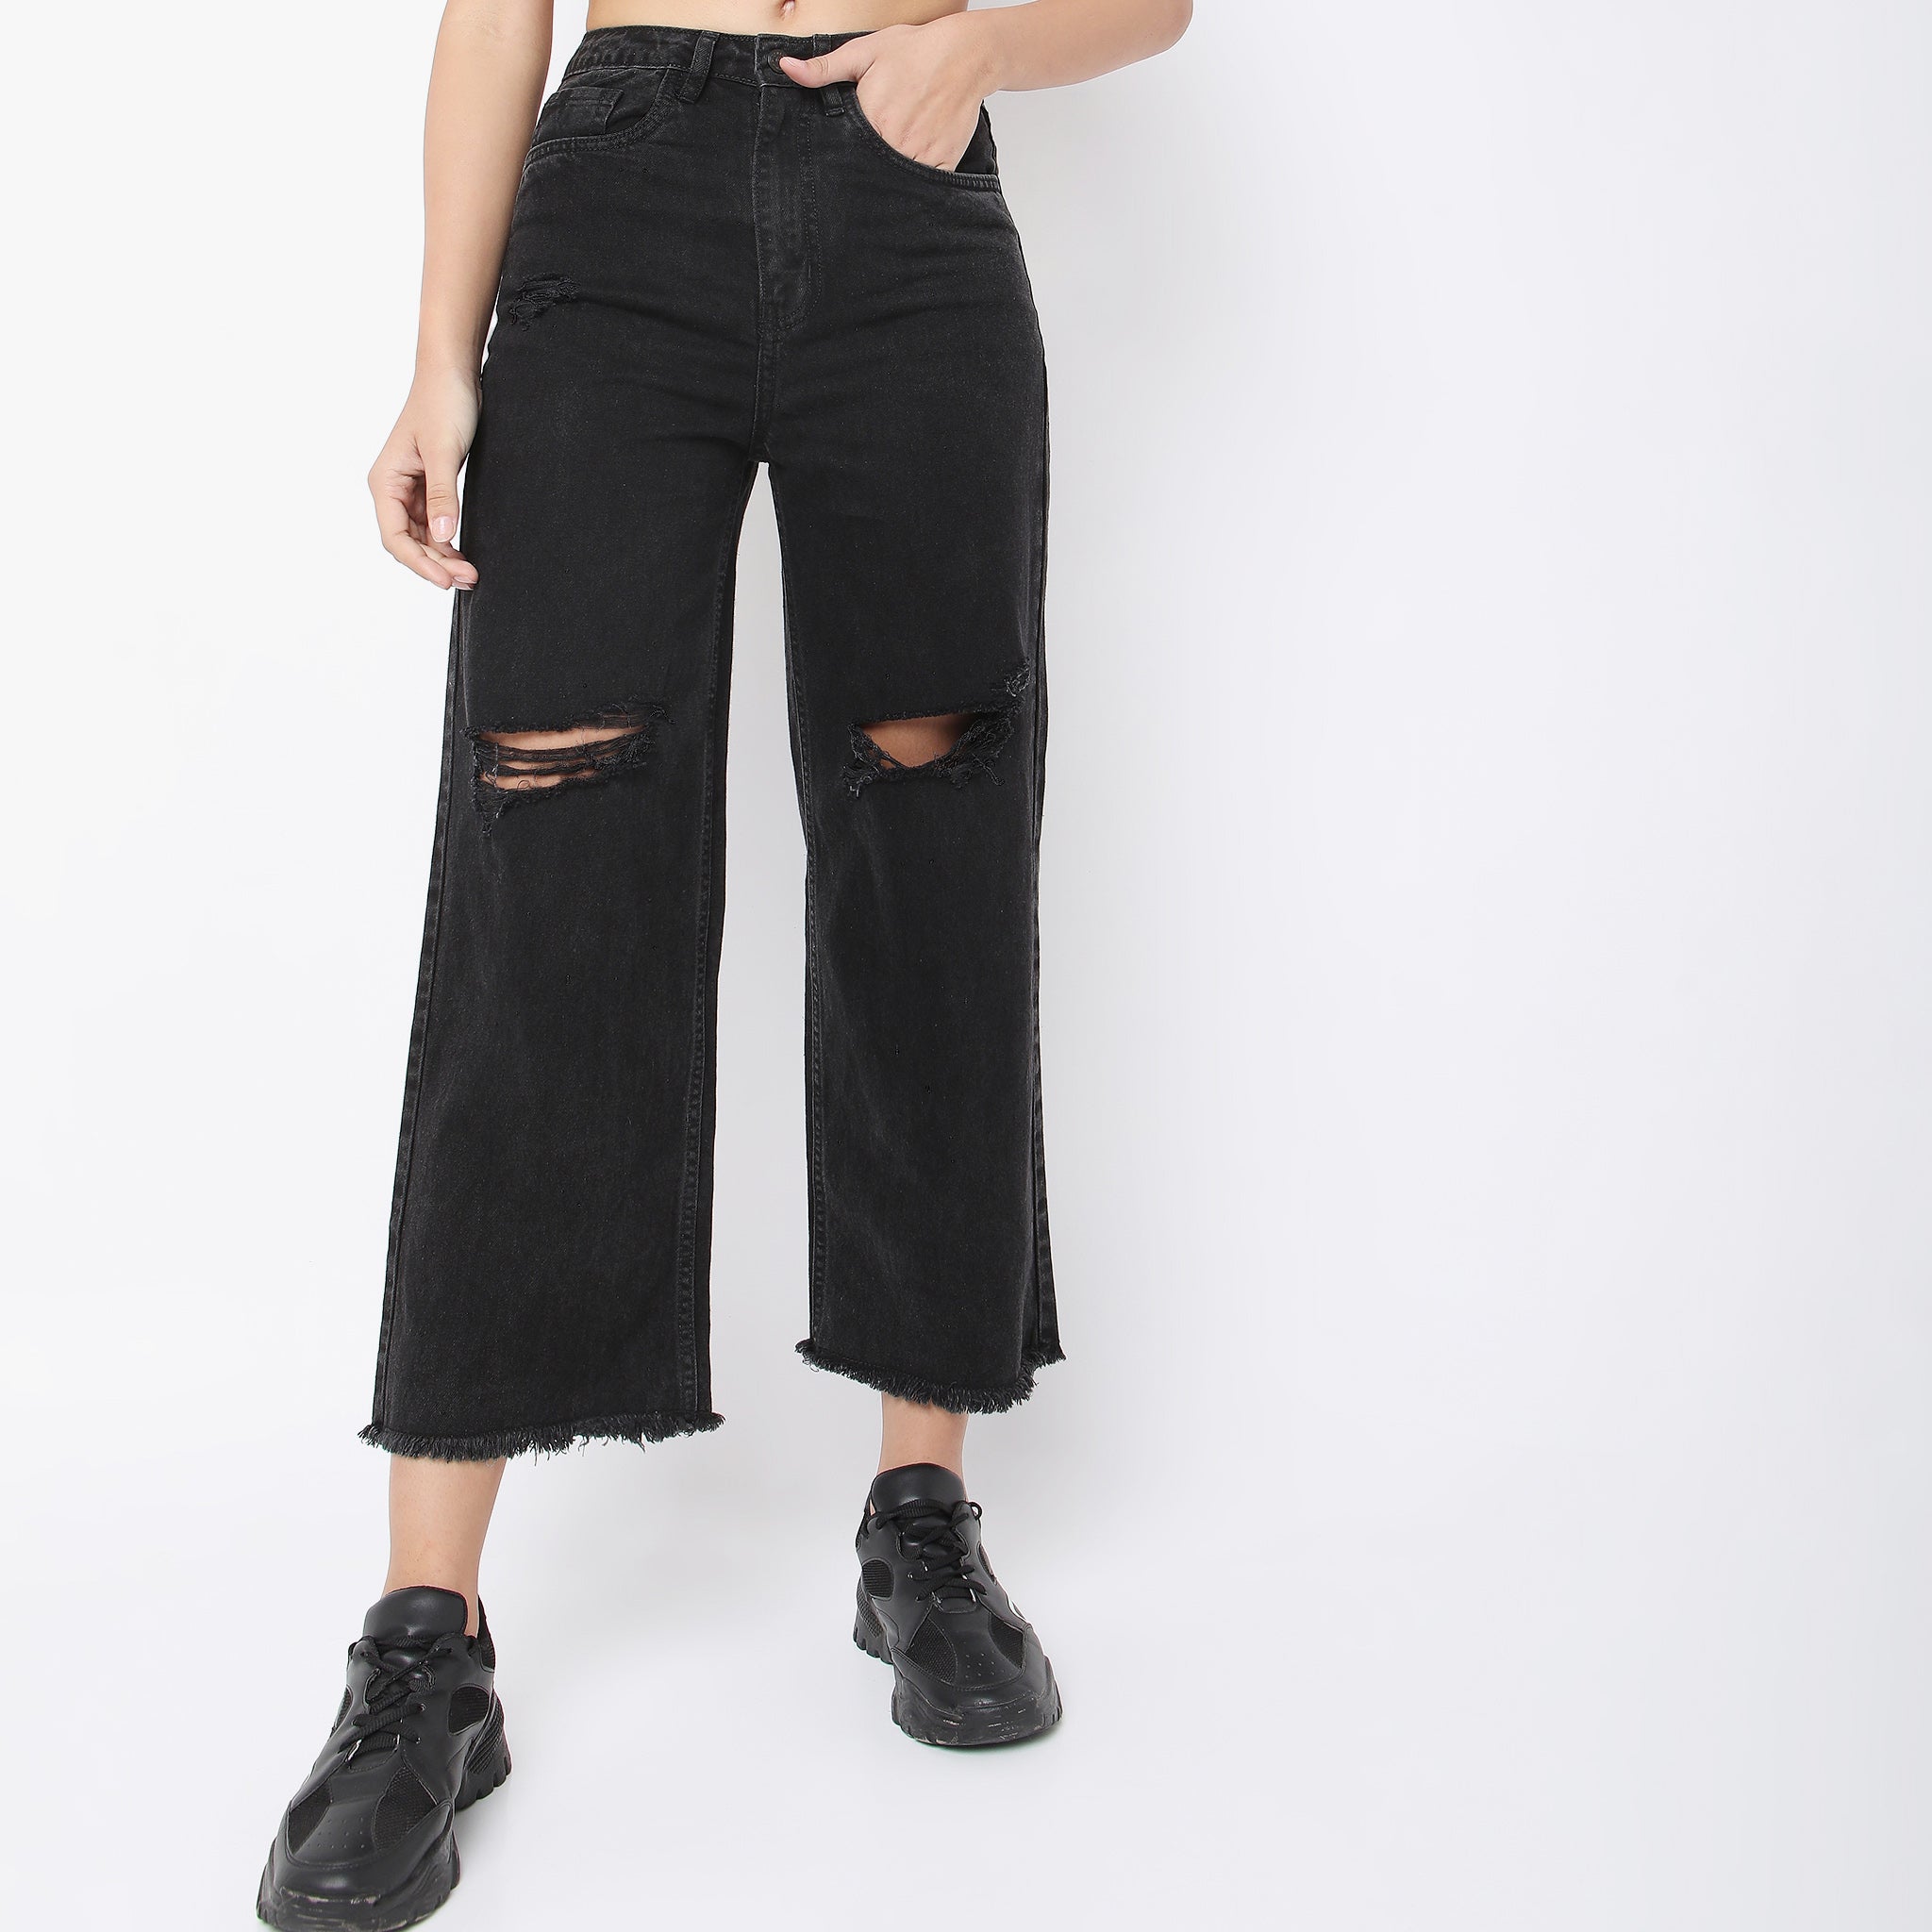 Flare Fit Solid High Rise Jeans